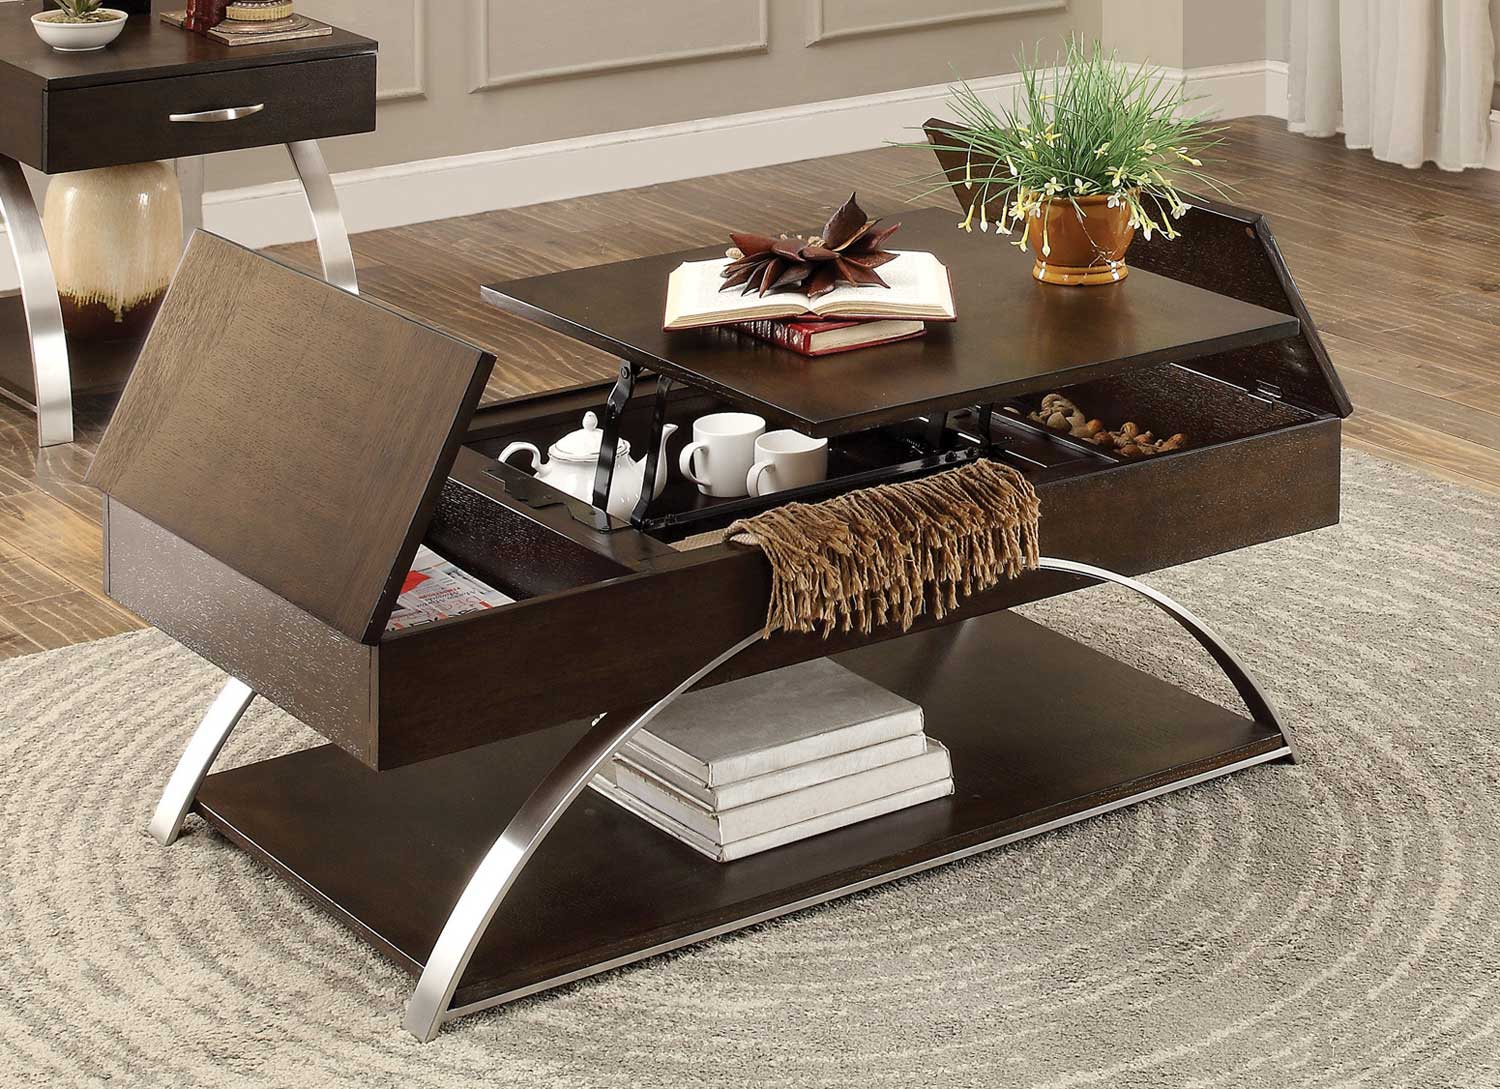 Homelegance Tioga Cocktail Table with Lift Top and Storage - Espresso